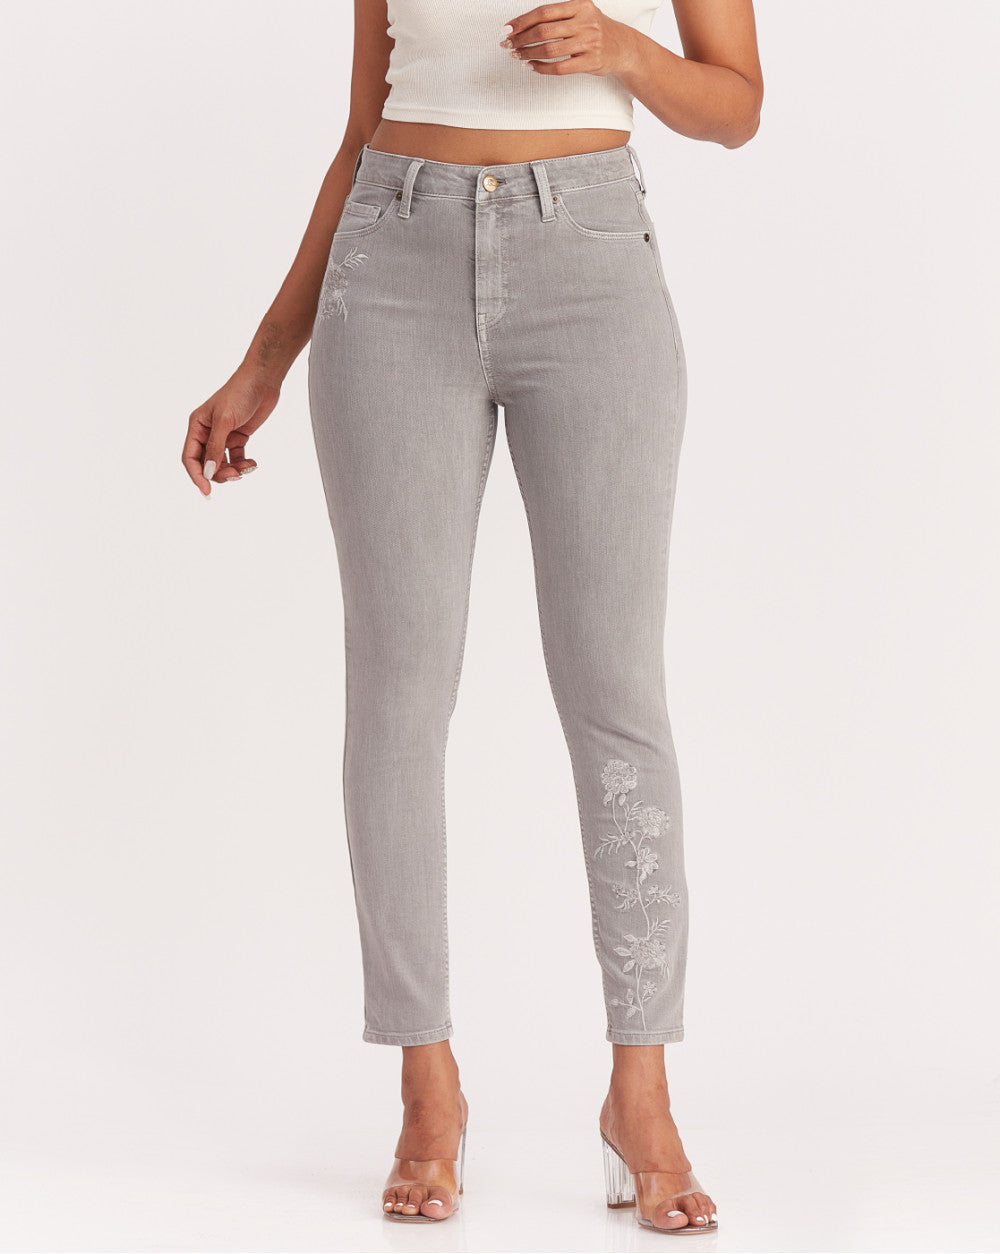 Skinny Fit High Waist Floral Embroidered Colored Jeans - Soft Grey